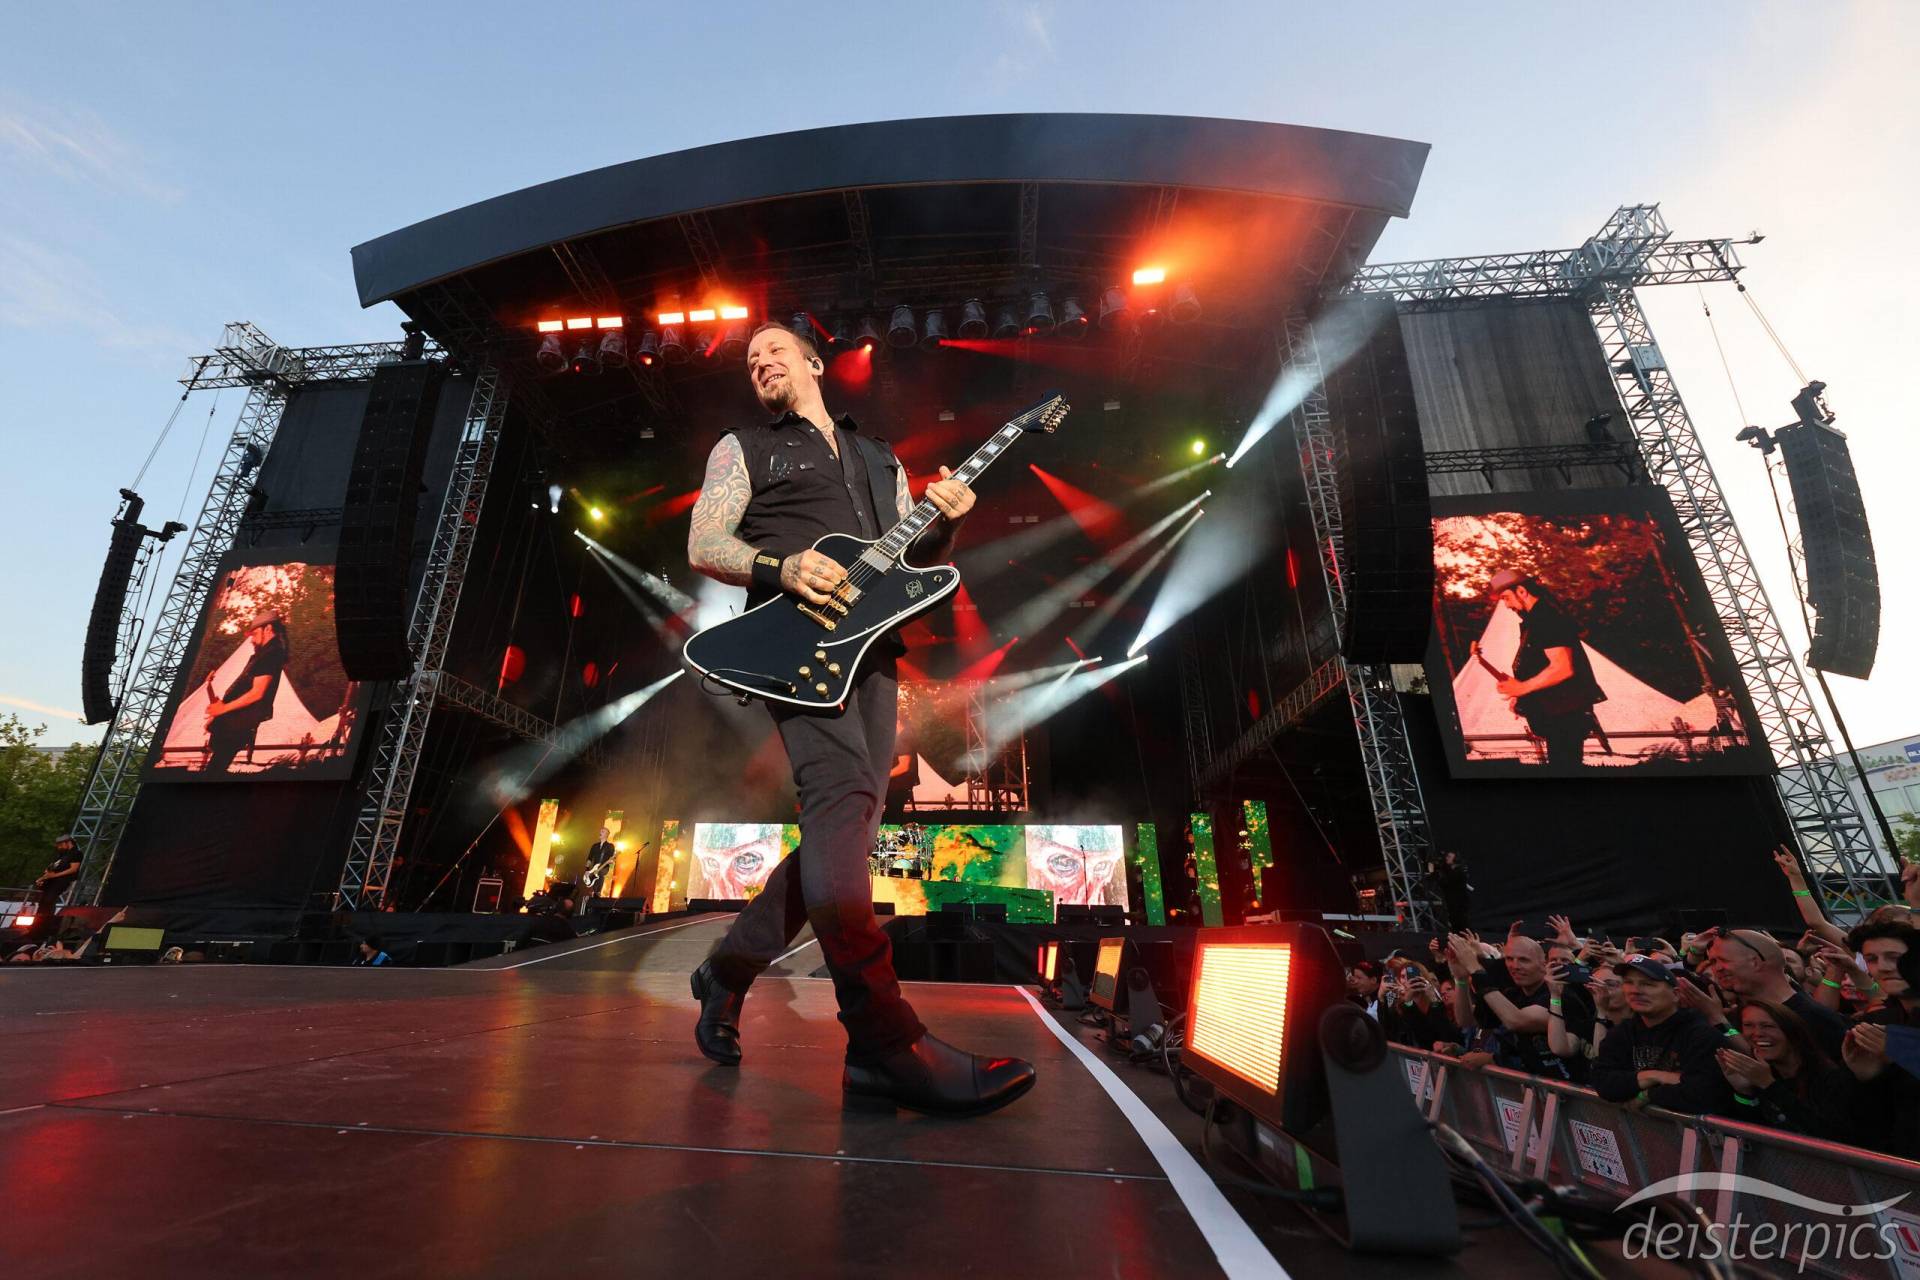 02.06.2022 - Expo Plaza Hannover - Volbeat - Foto:Stefan Zwing/deisterpics